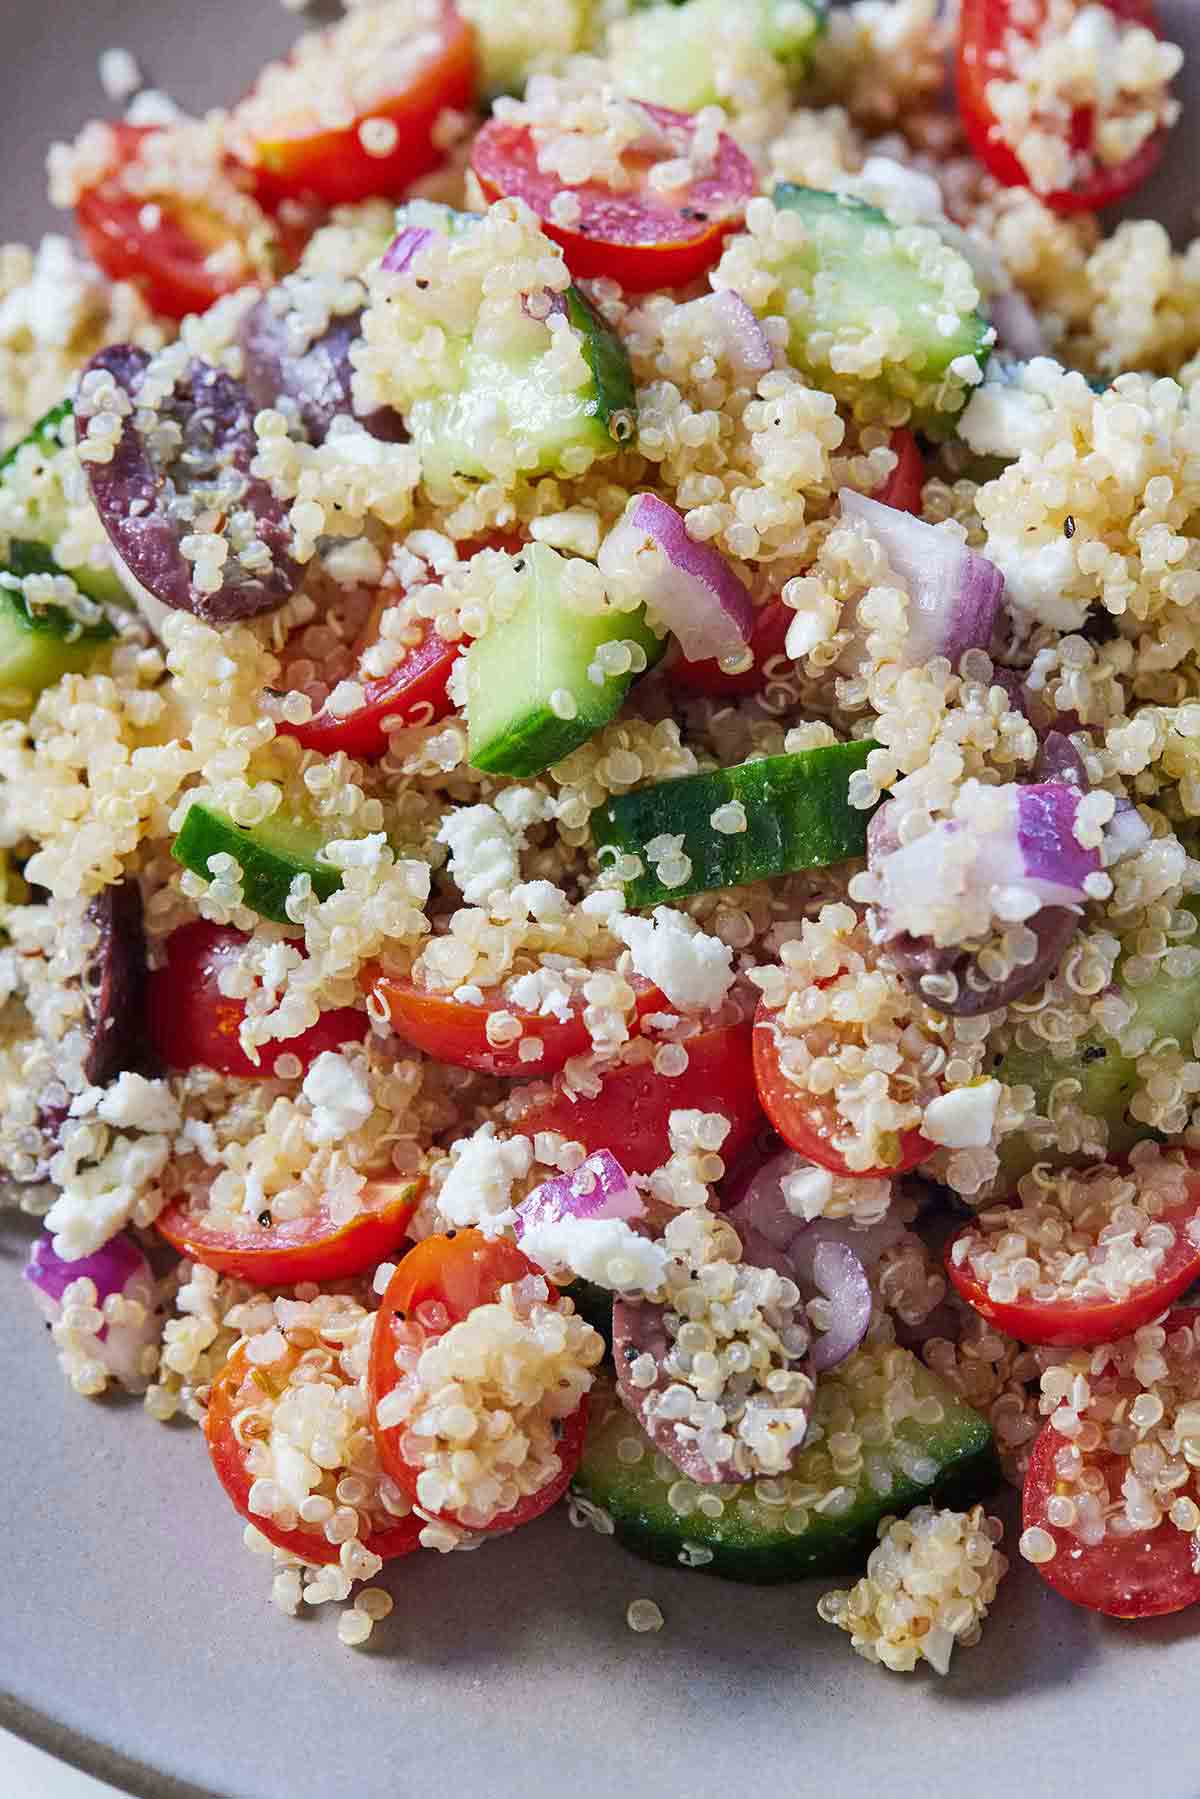 Close up image of a Greek quinoa salad with red onions, cucumbers, tomatoes, and olives.